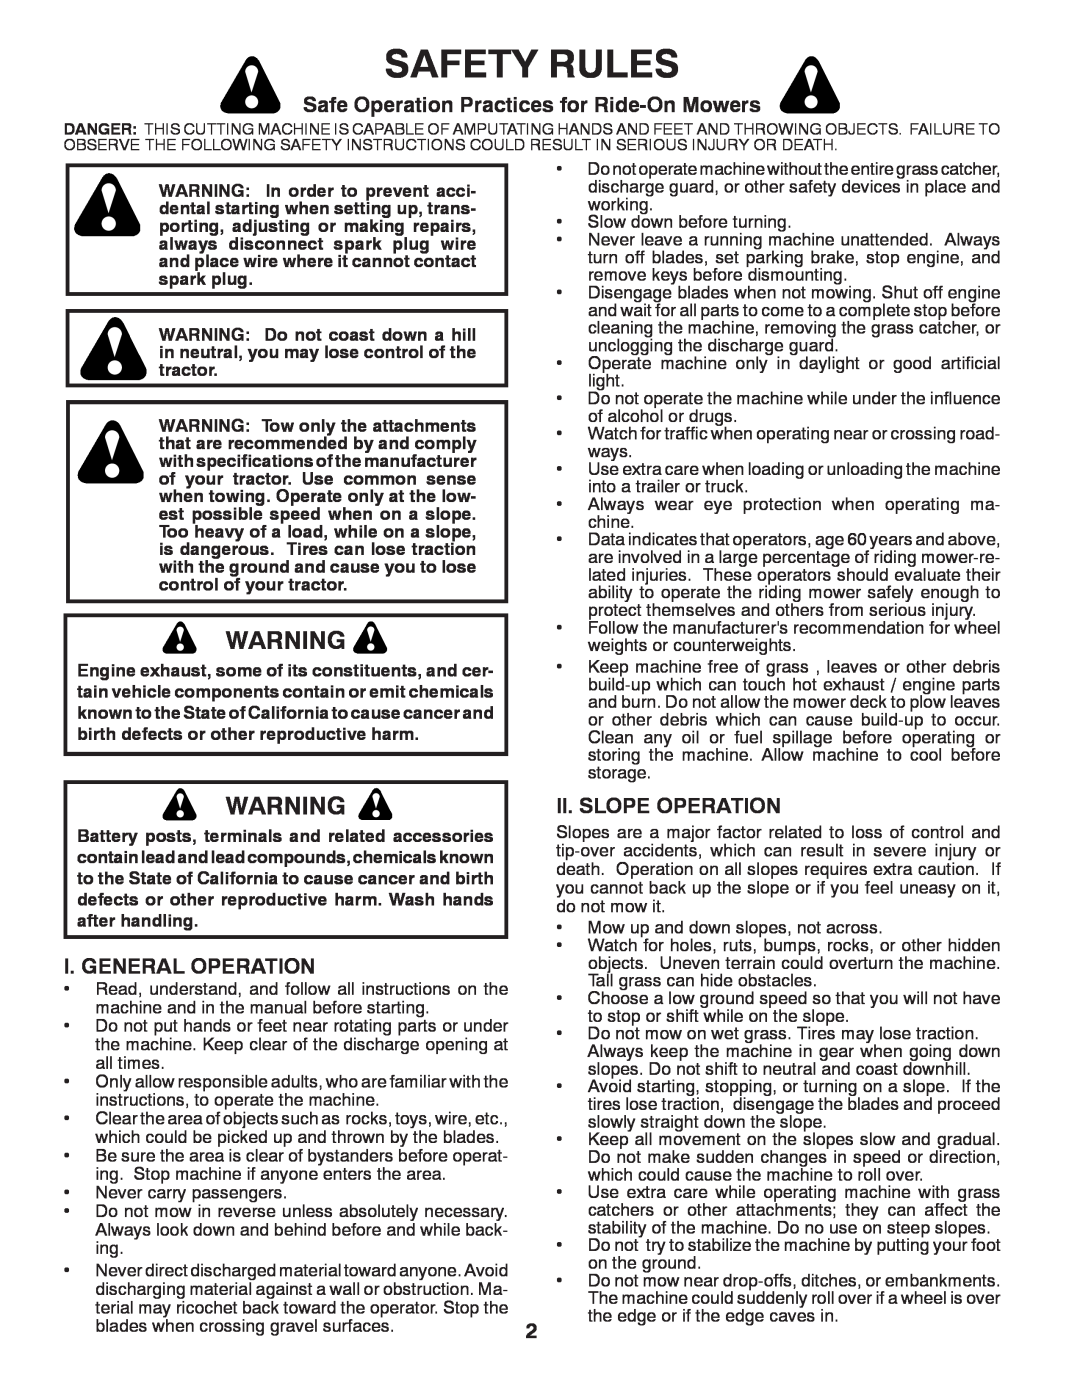 Poulan pb19546lt Safety Rules, Safe Operation Practices for Ride-On Mowers, I. General Operation, Ii. Slope Operation 